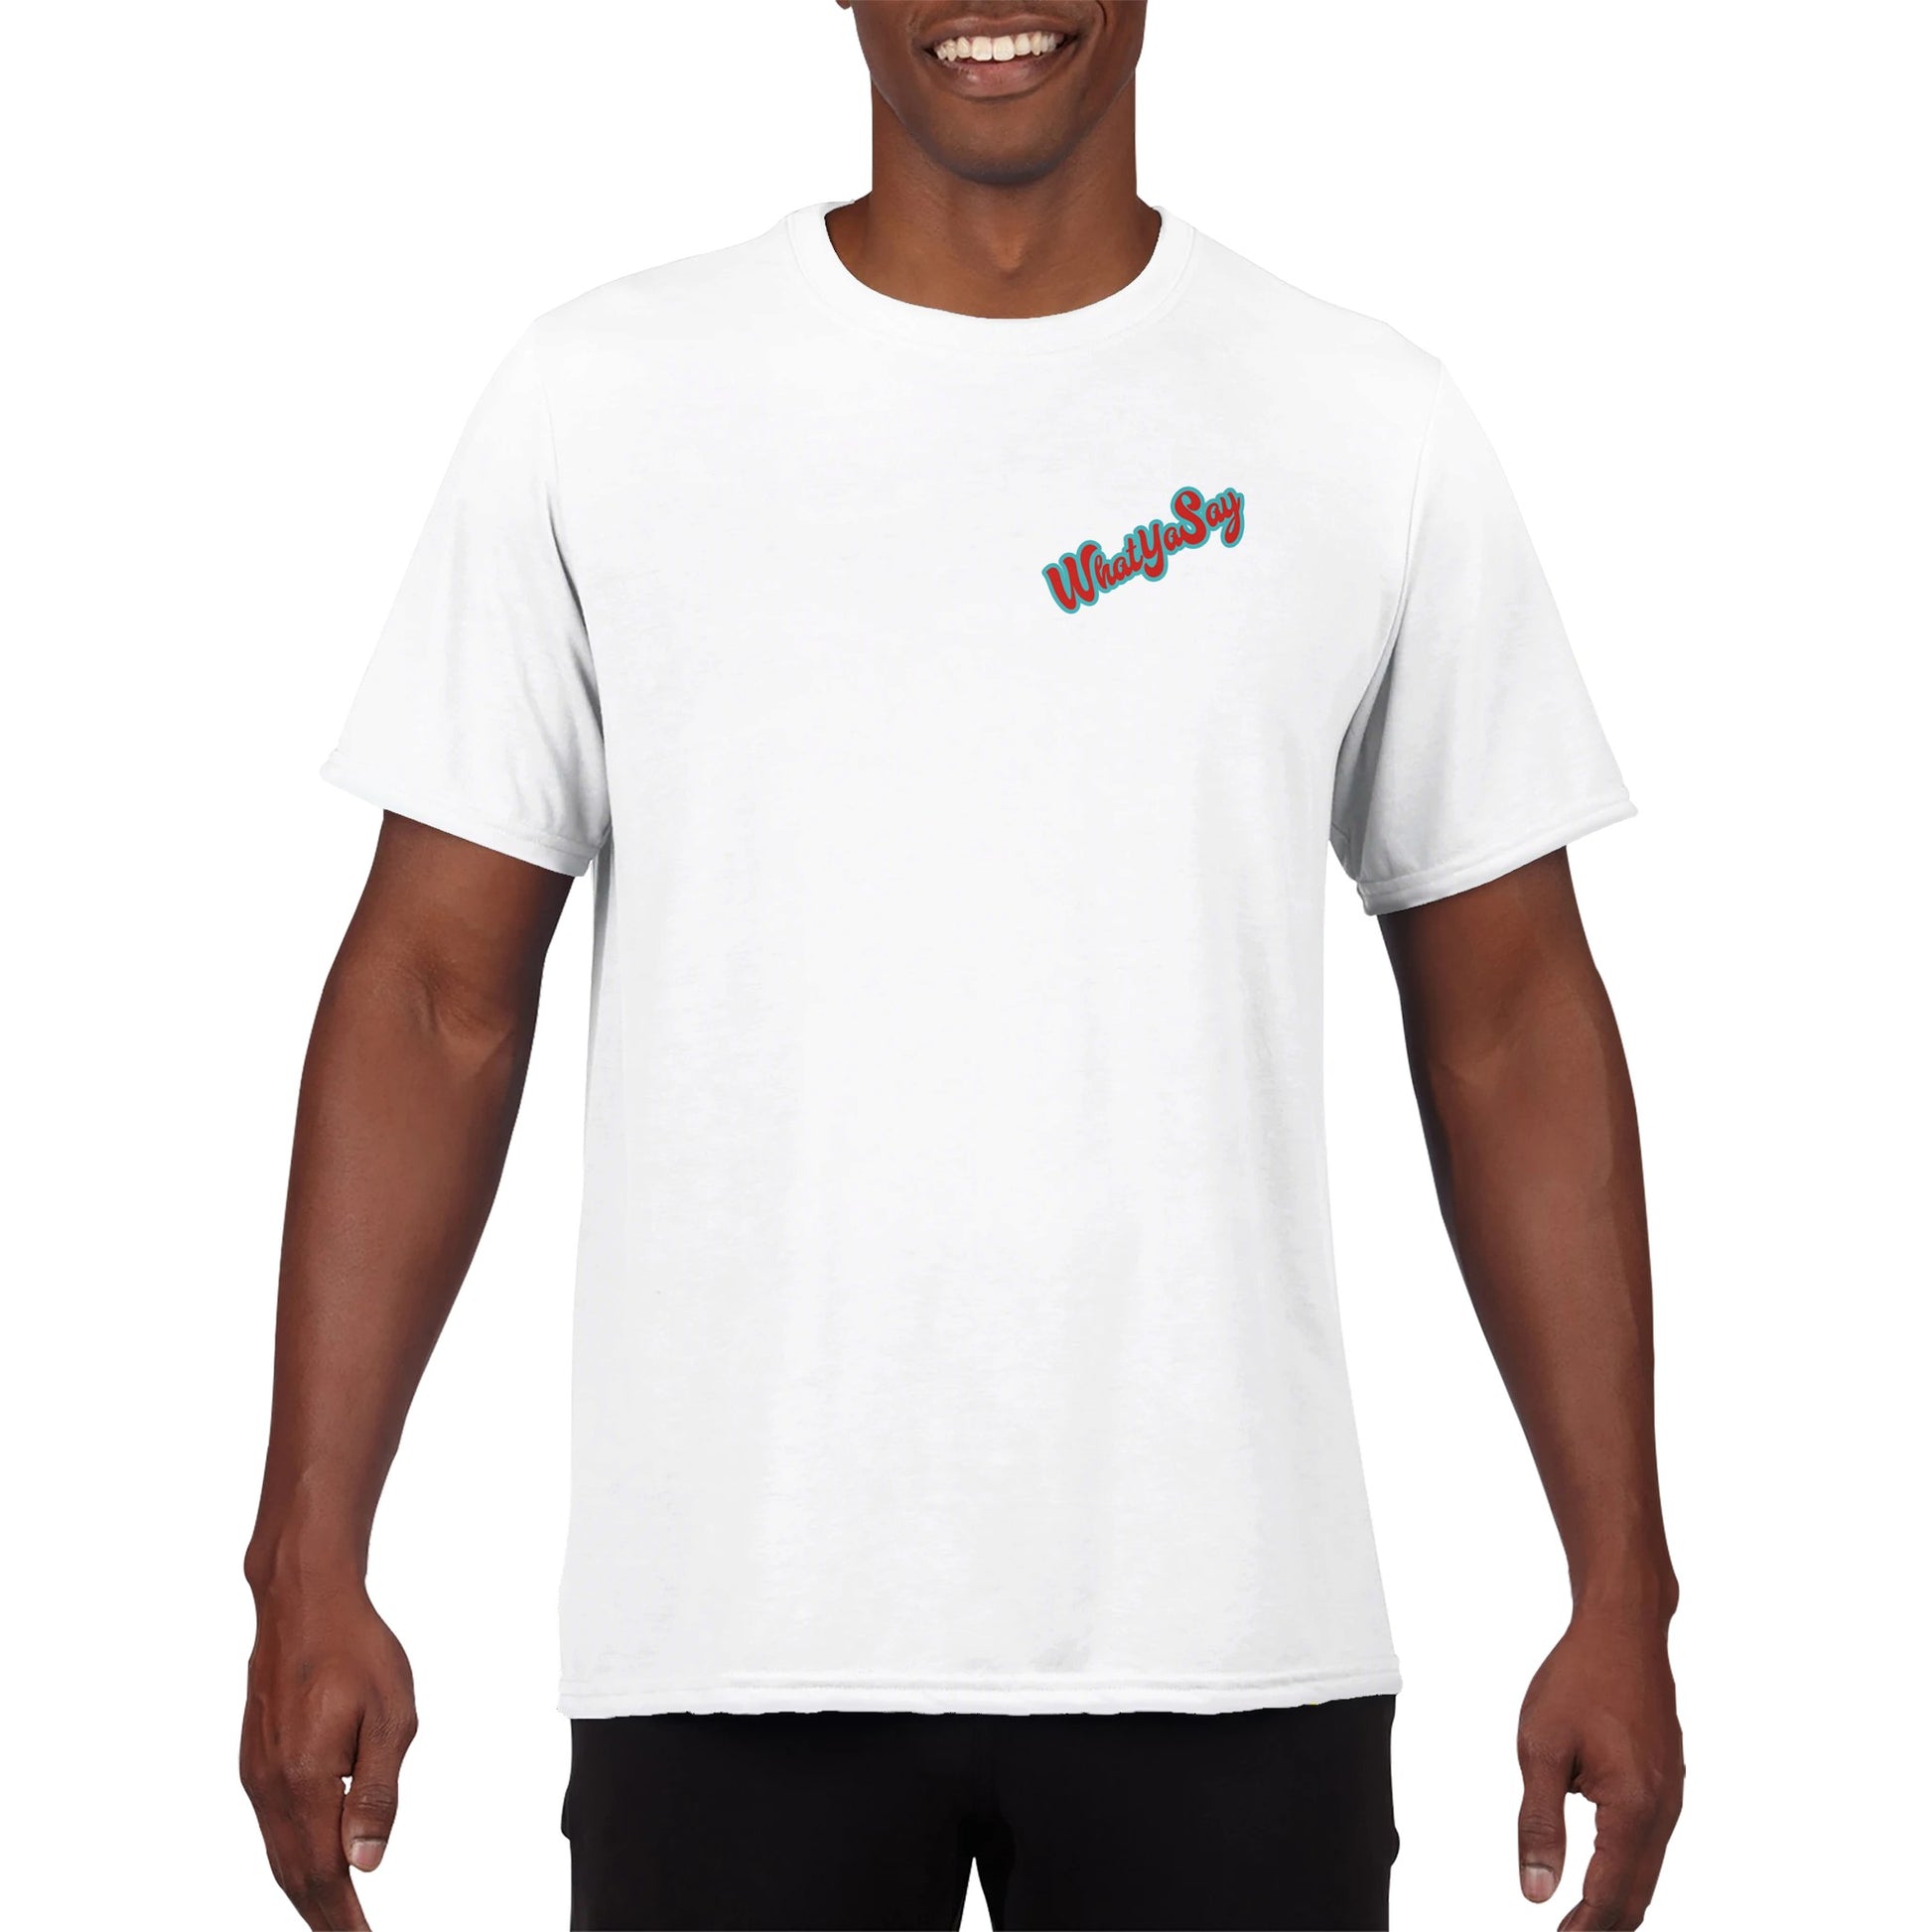 A white Performance Unisex Crewneck t-shirt with original artwork and motto I Got 99 Problems But a Margarita Aint One on back of t-shirt and WhatYa Say logo on front from WhatYa Say Apparel a front view of happy African American male model.